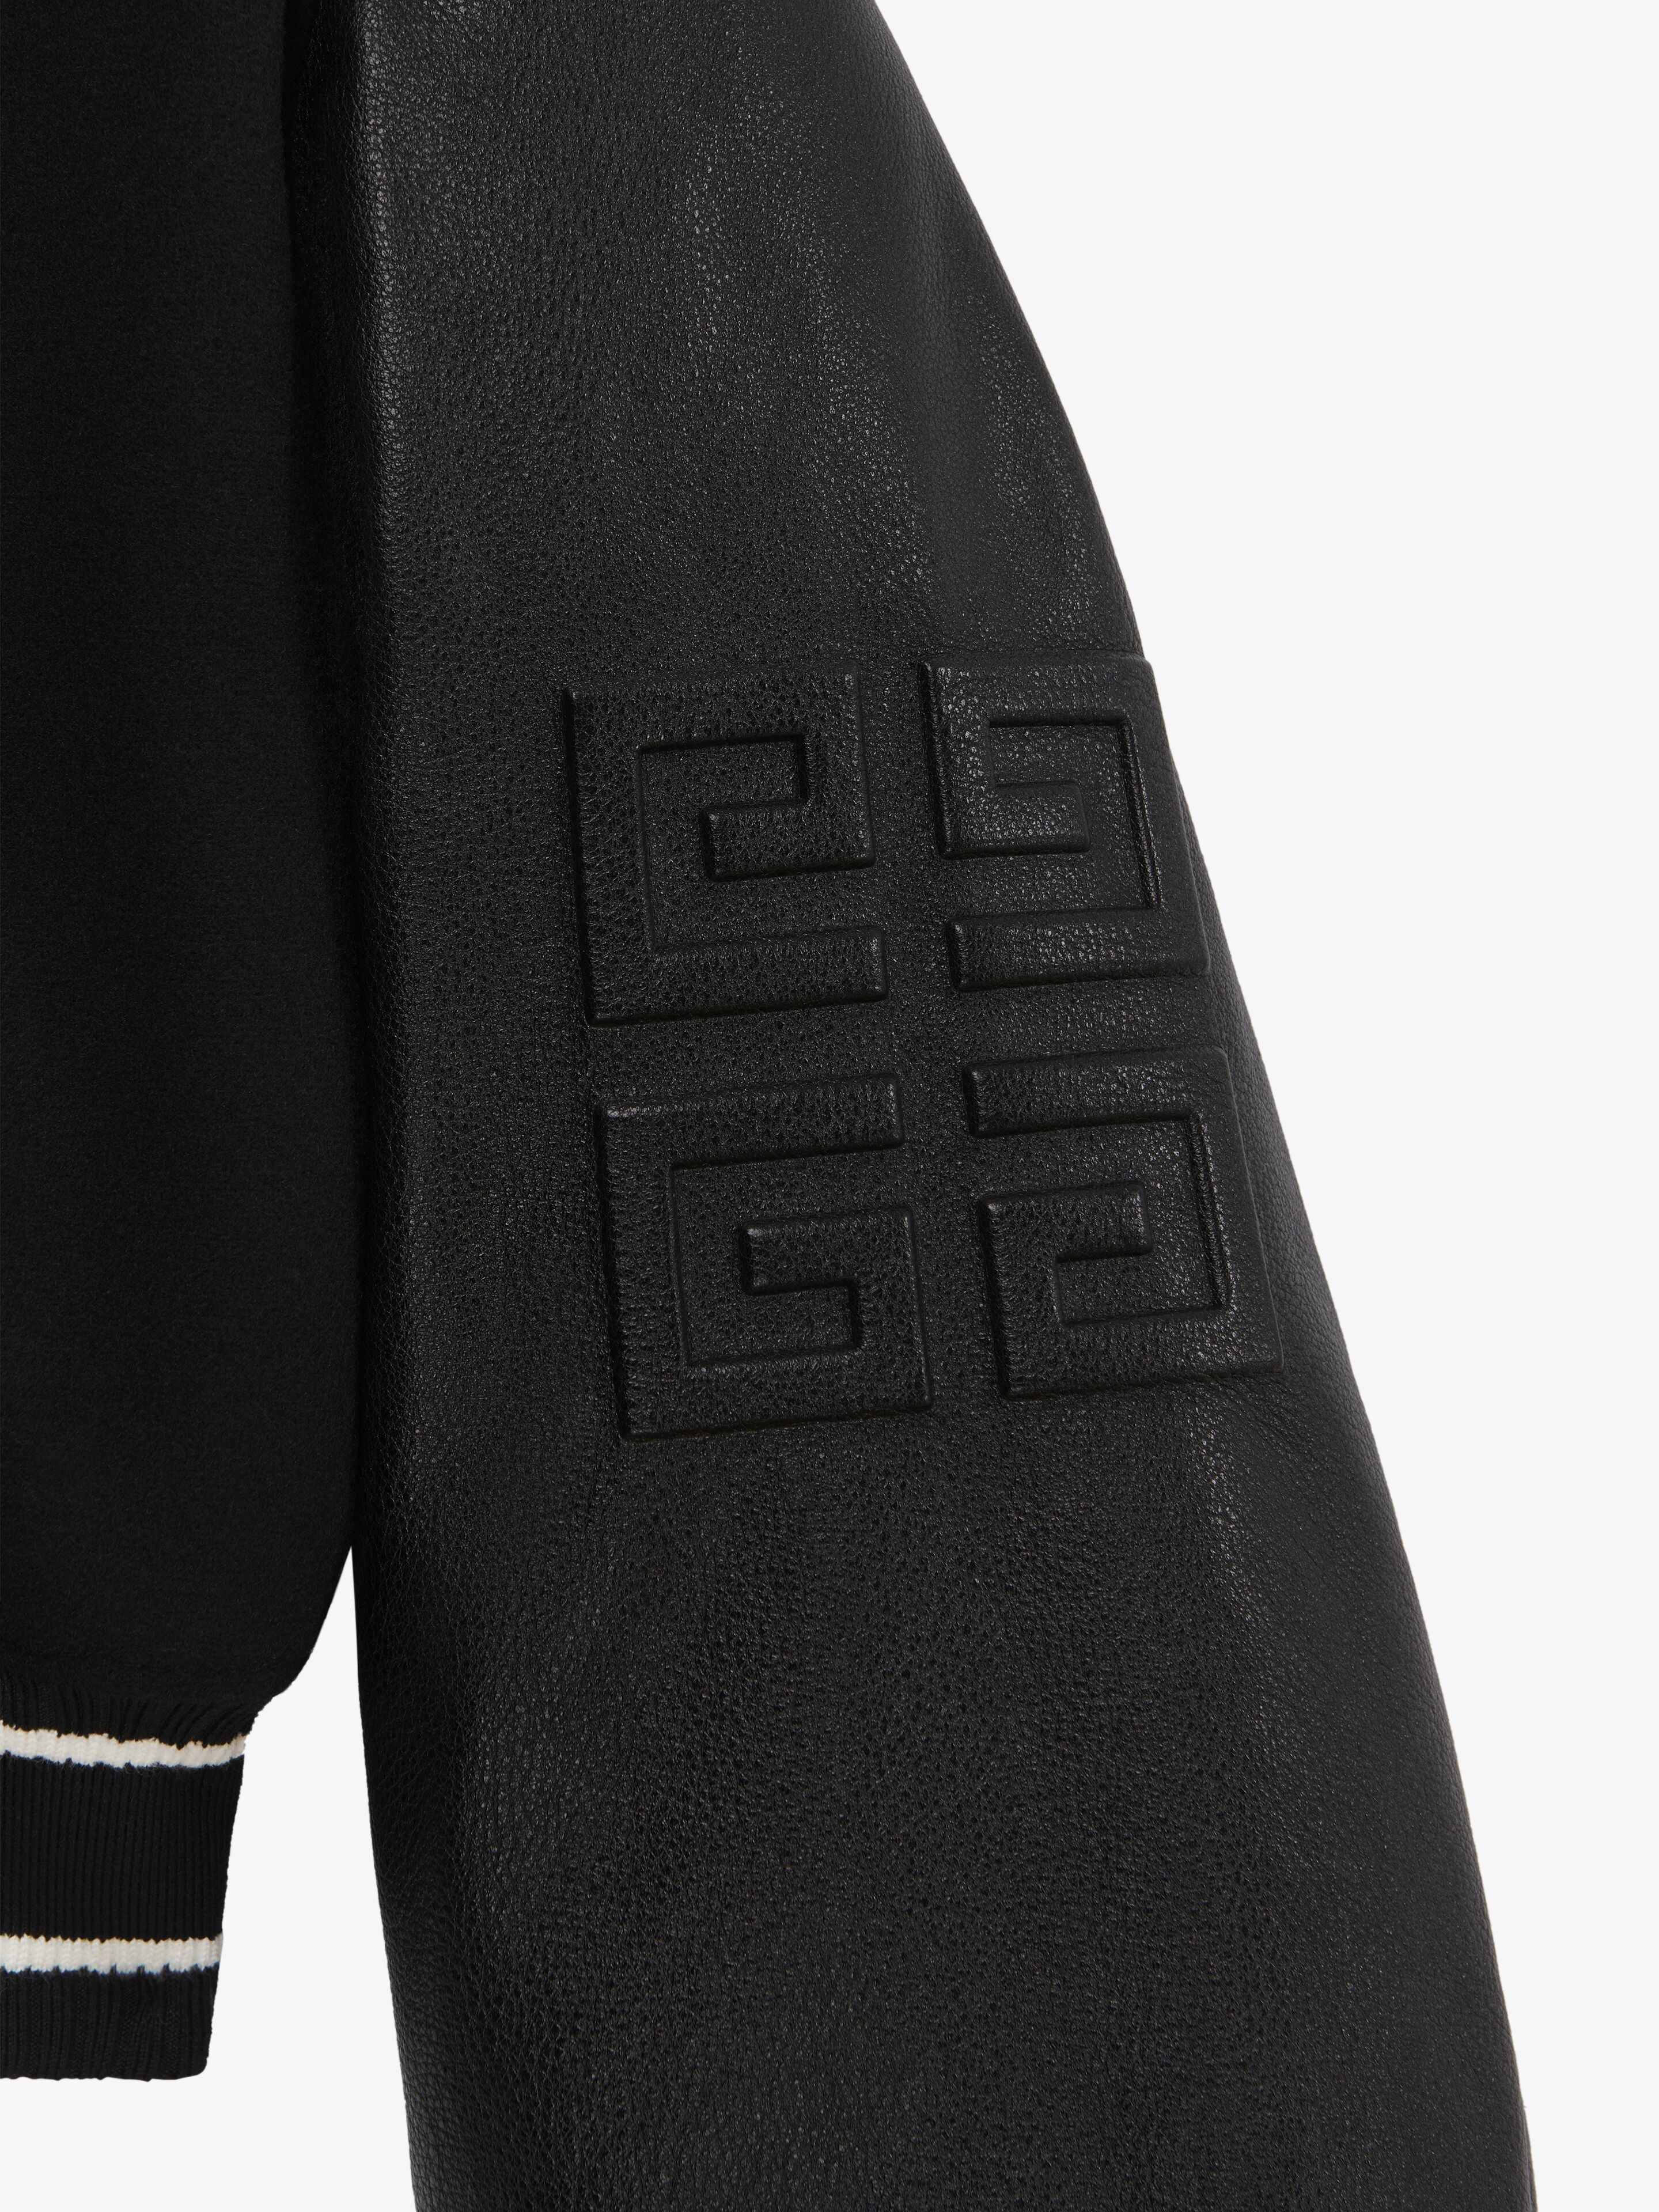 GIVENCHY CROPPED VARSITY JACKET IN WOOL AND LEATHER - 6